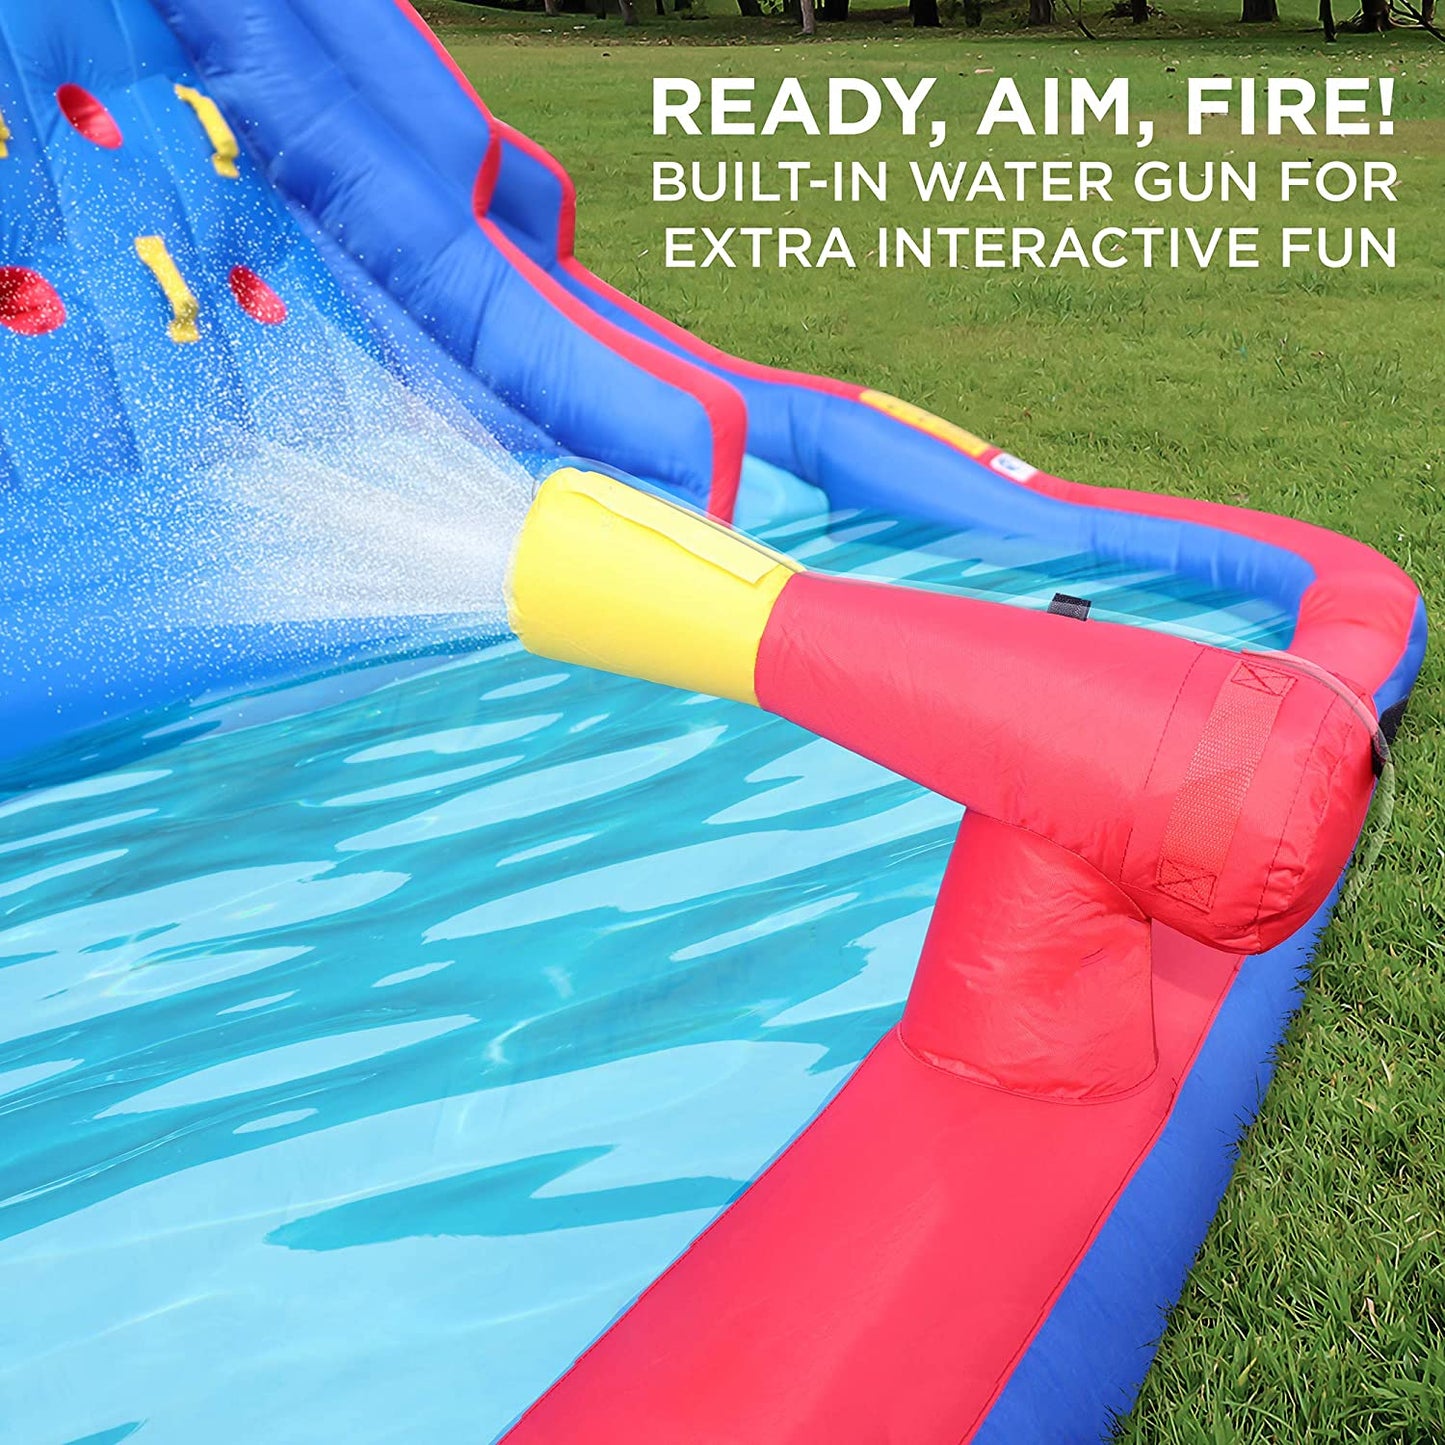 Ultra Climber Inflatable Water Slide Park – Heavy-Duty for Outdoor Fun - Climbing Wall, Two Slides & Splash Pool – Easy to Set up & Inflate with Included Air Pump & Carrying Case